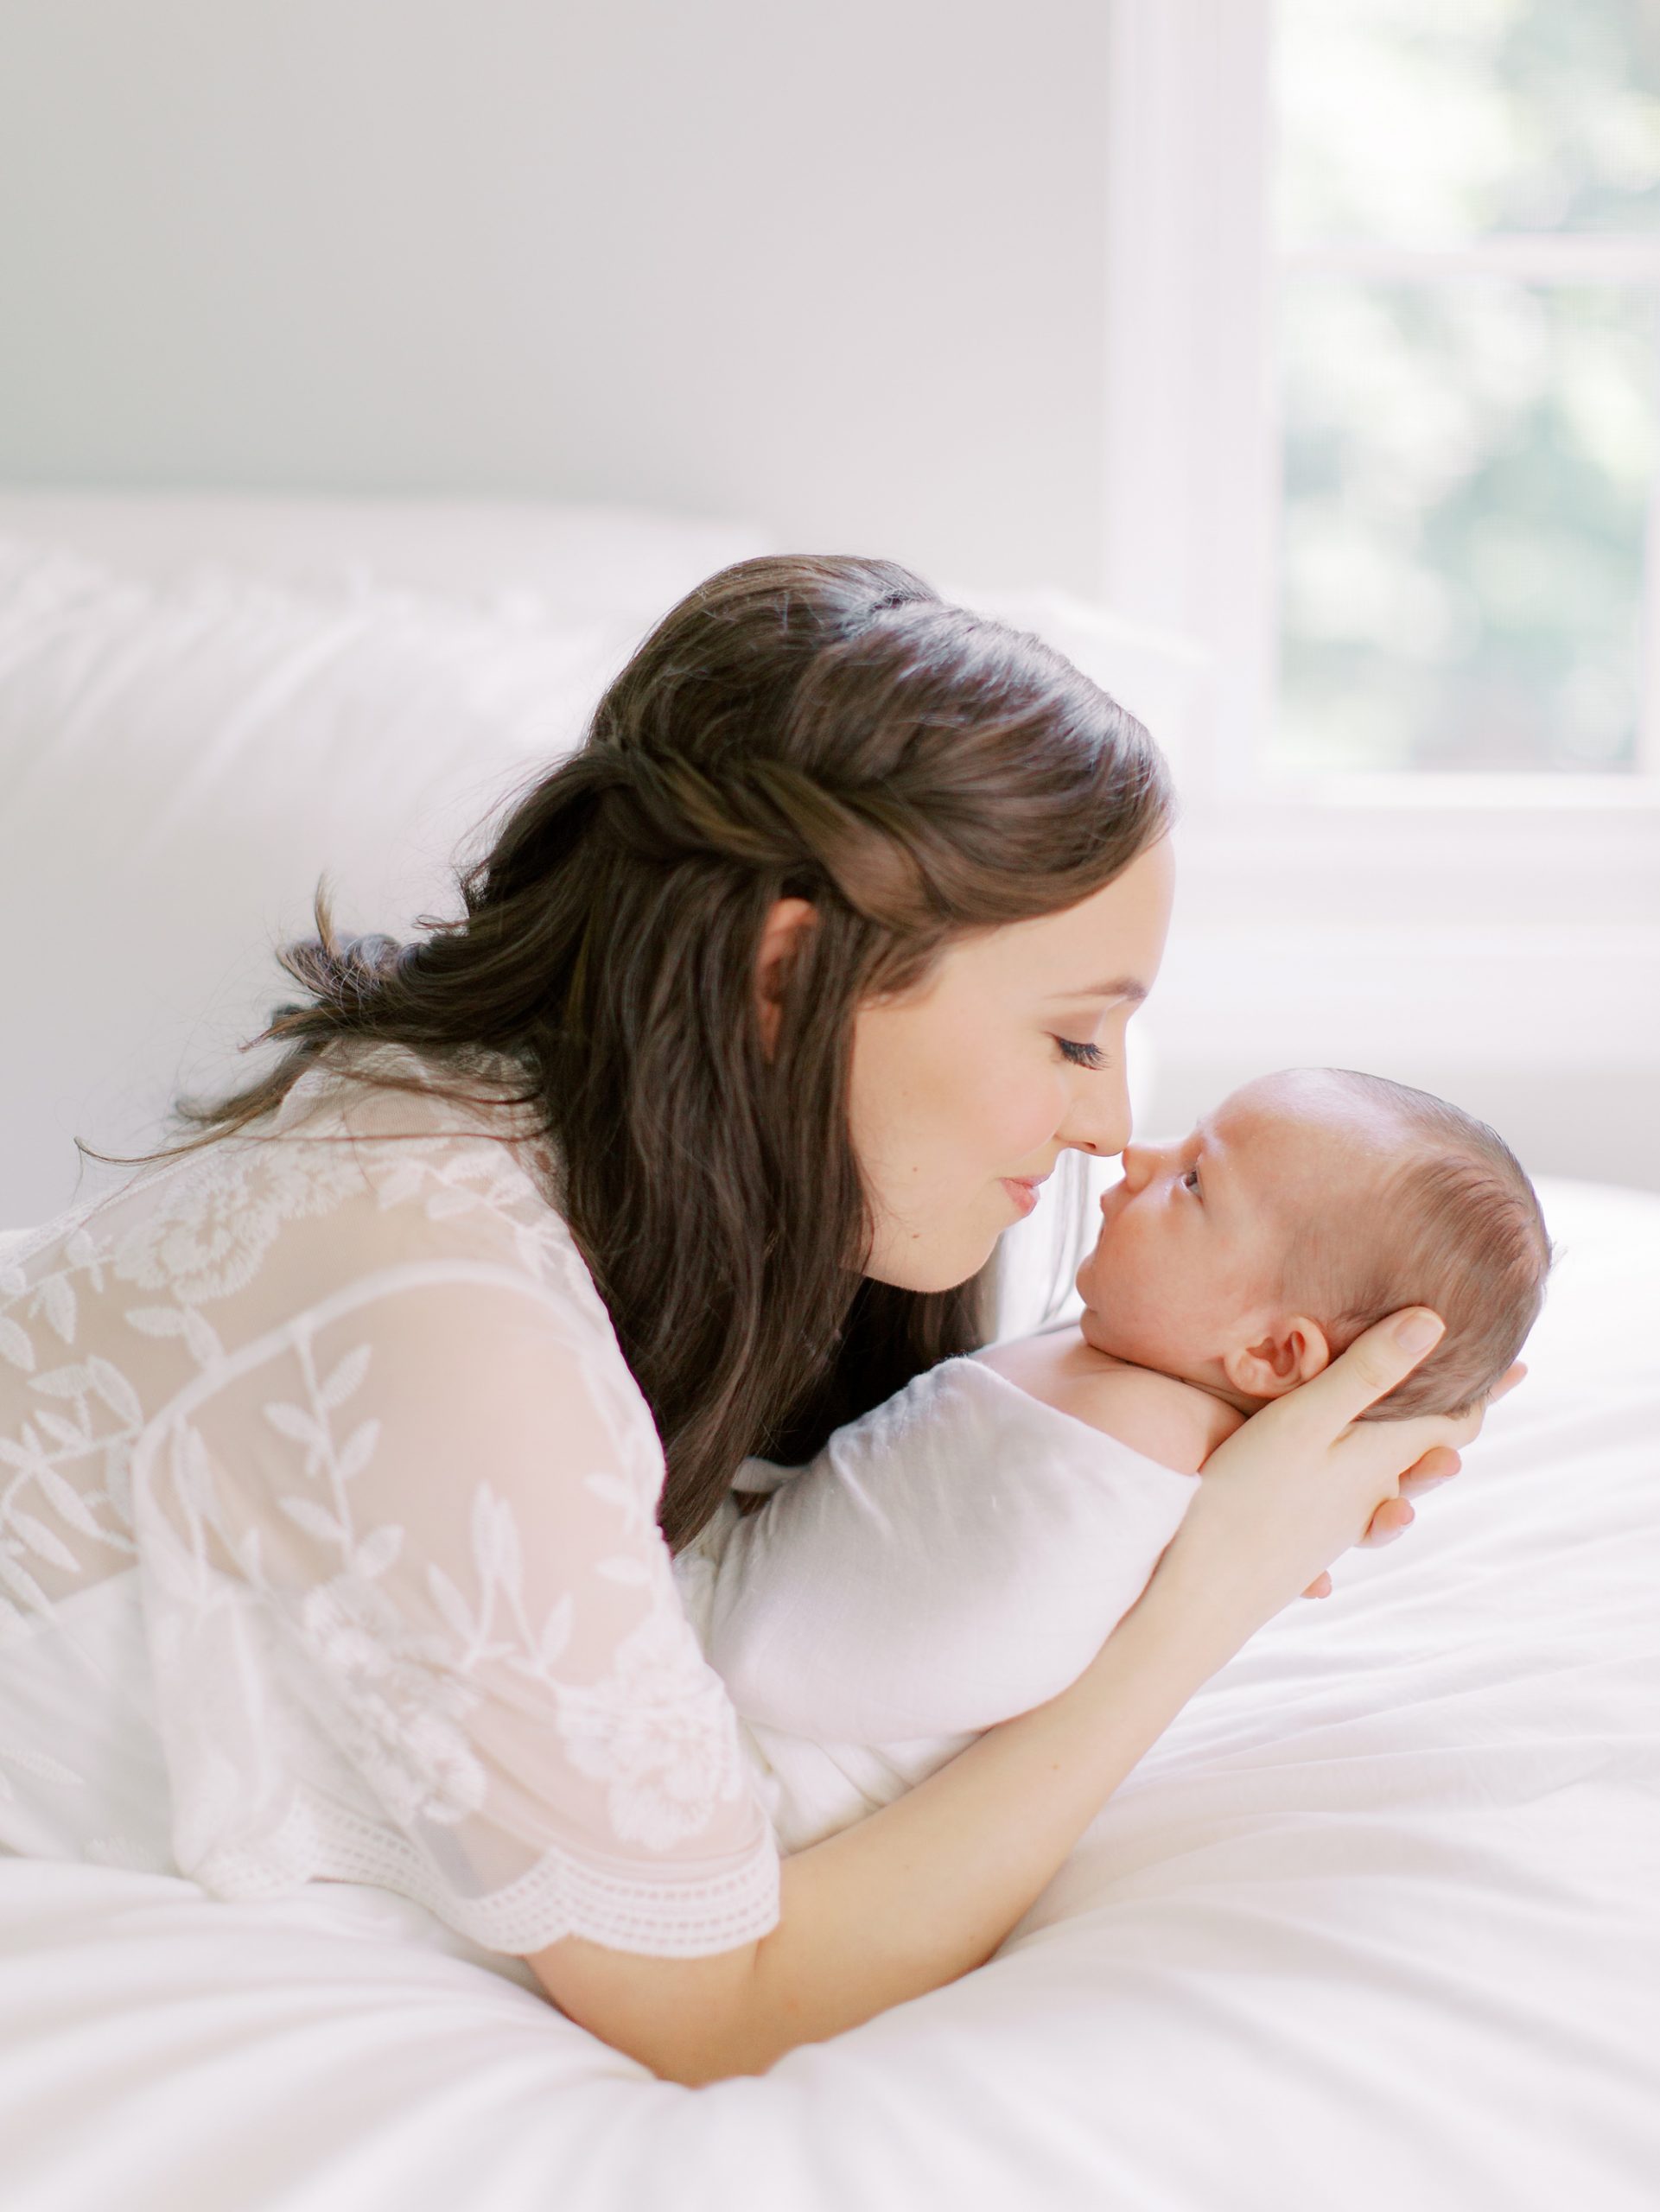 mom nuzzles noses with baby boy at home